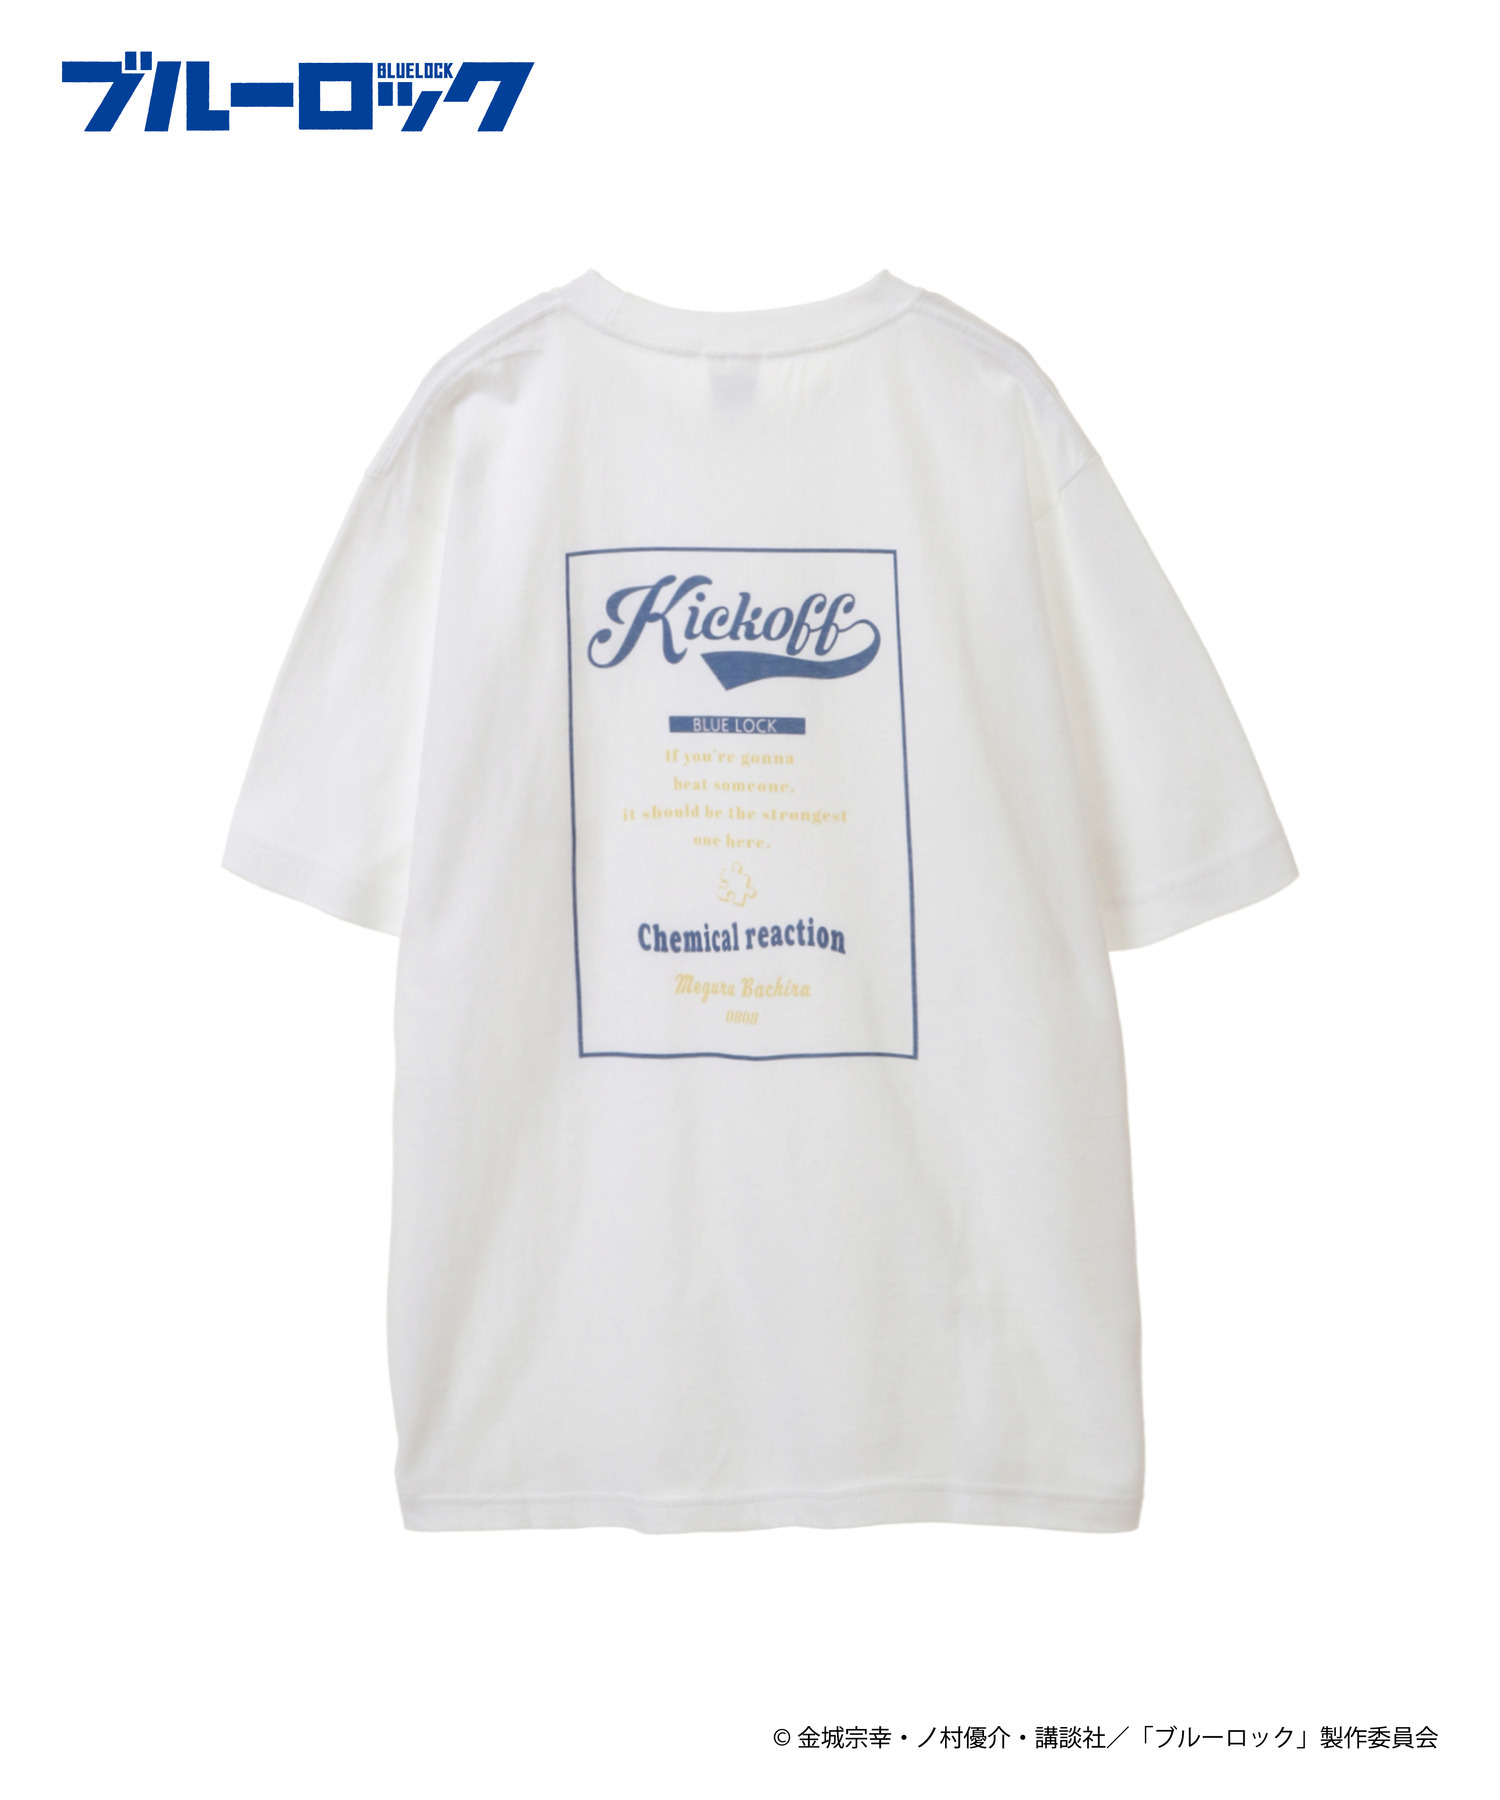 TVアニメ『ブルーロック』Tシャツ_蜂楽 廻｜HICUL ONLINE STORE